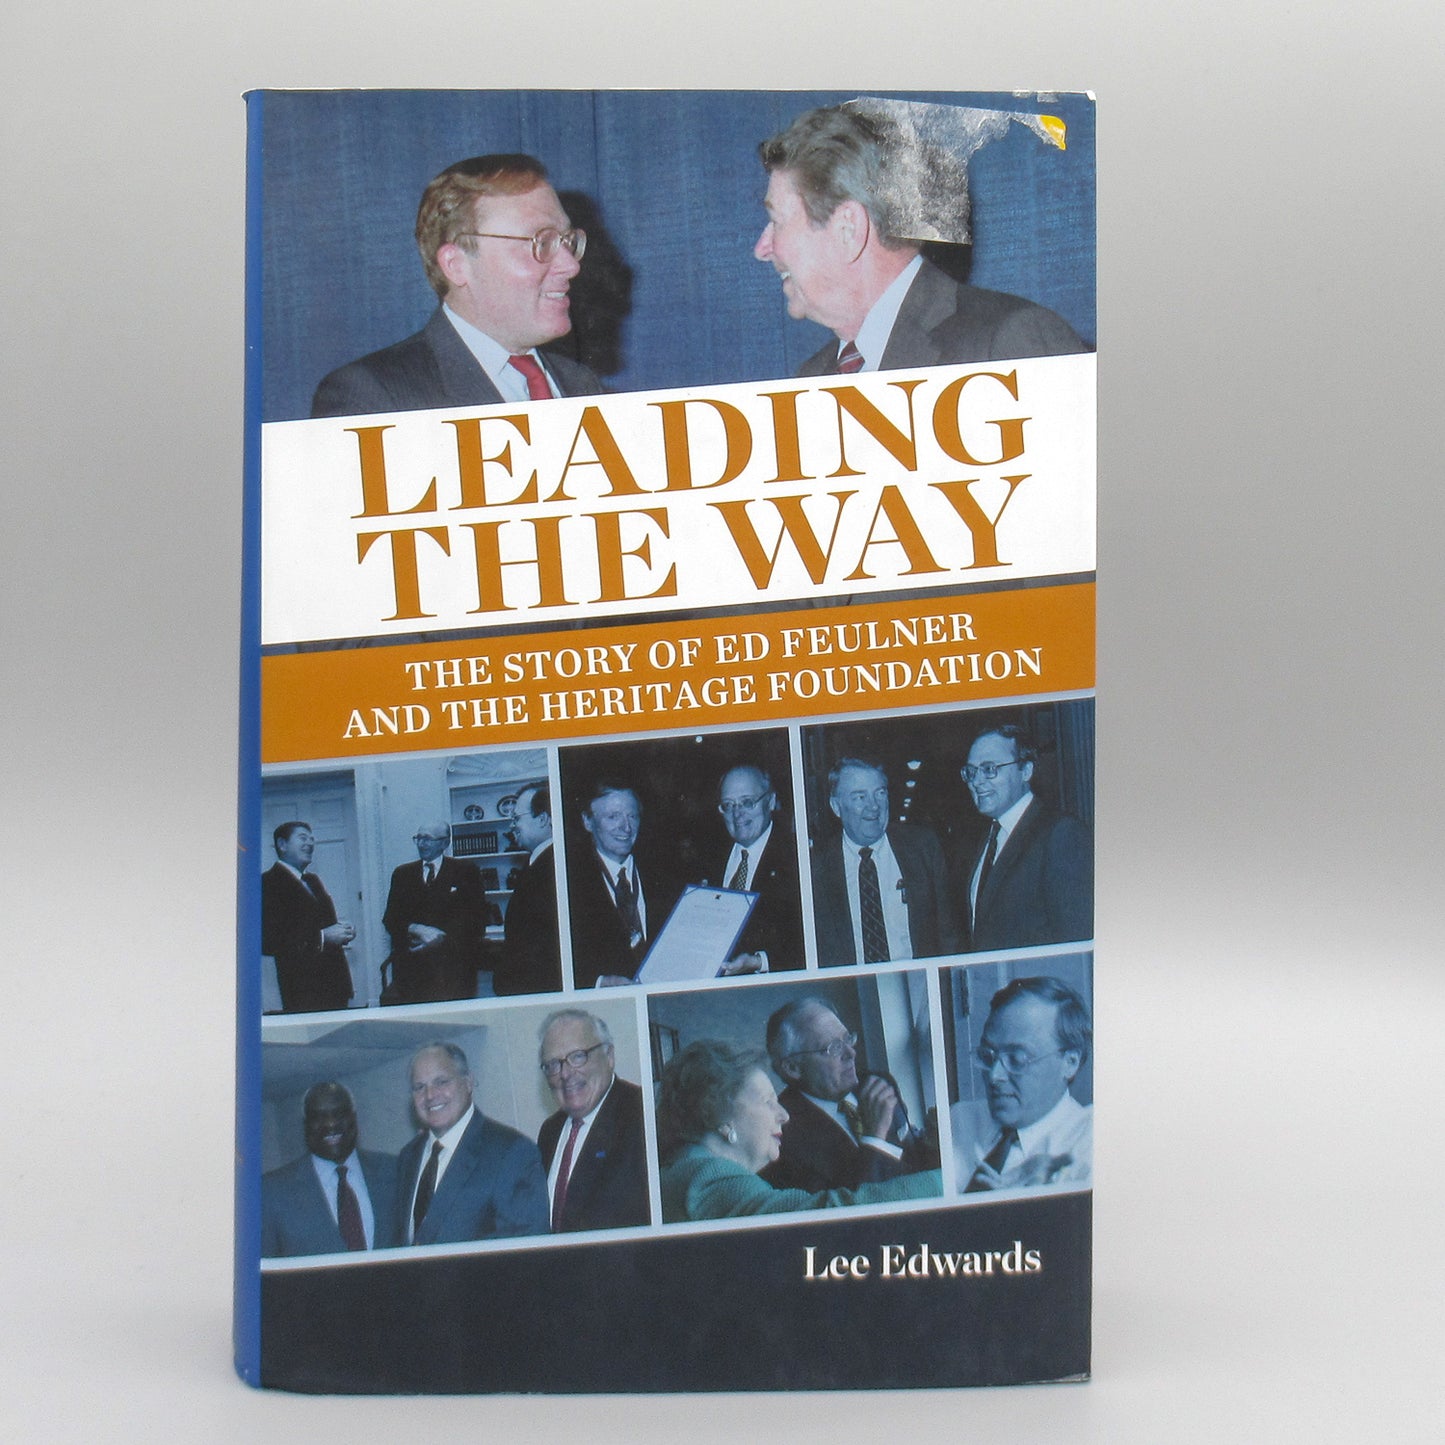 Leading the Way: The Story of Ed Feulner and the Heritage Foundation